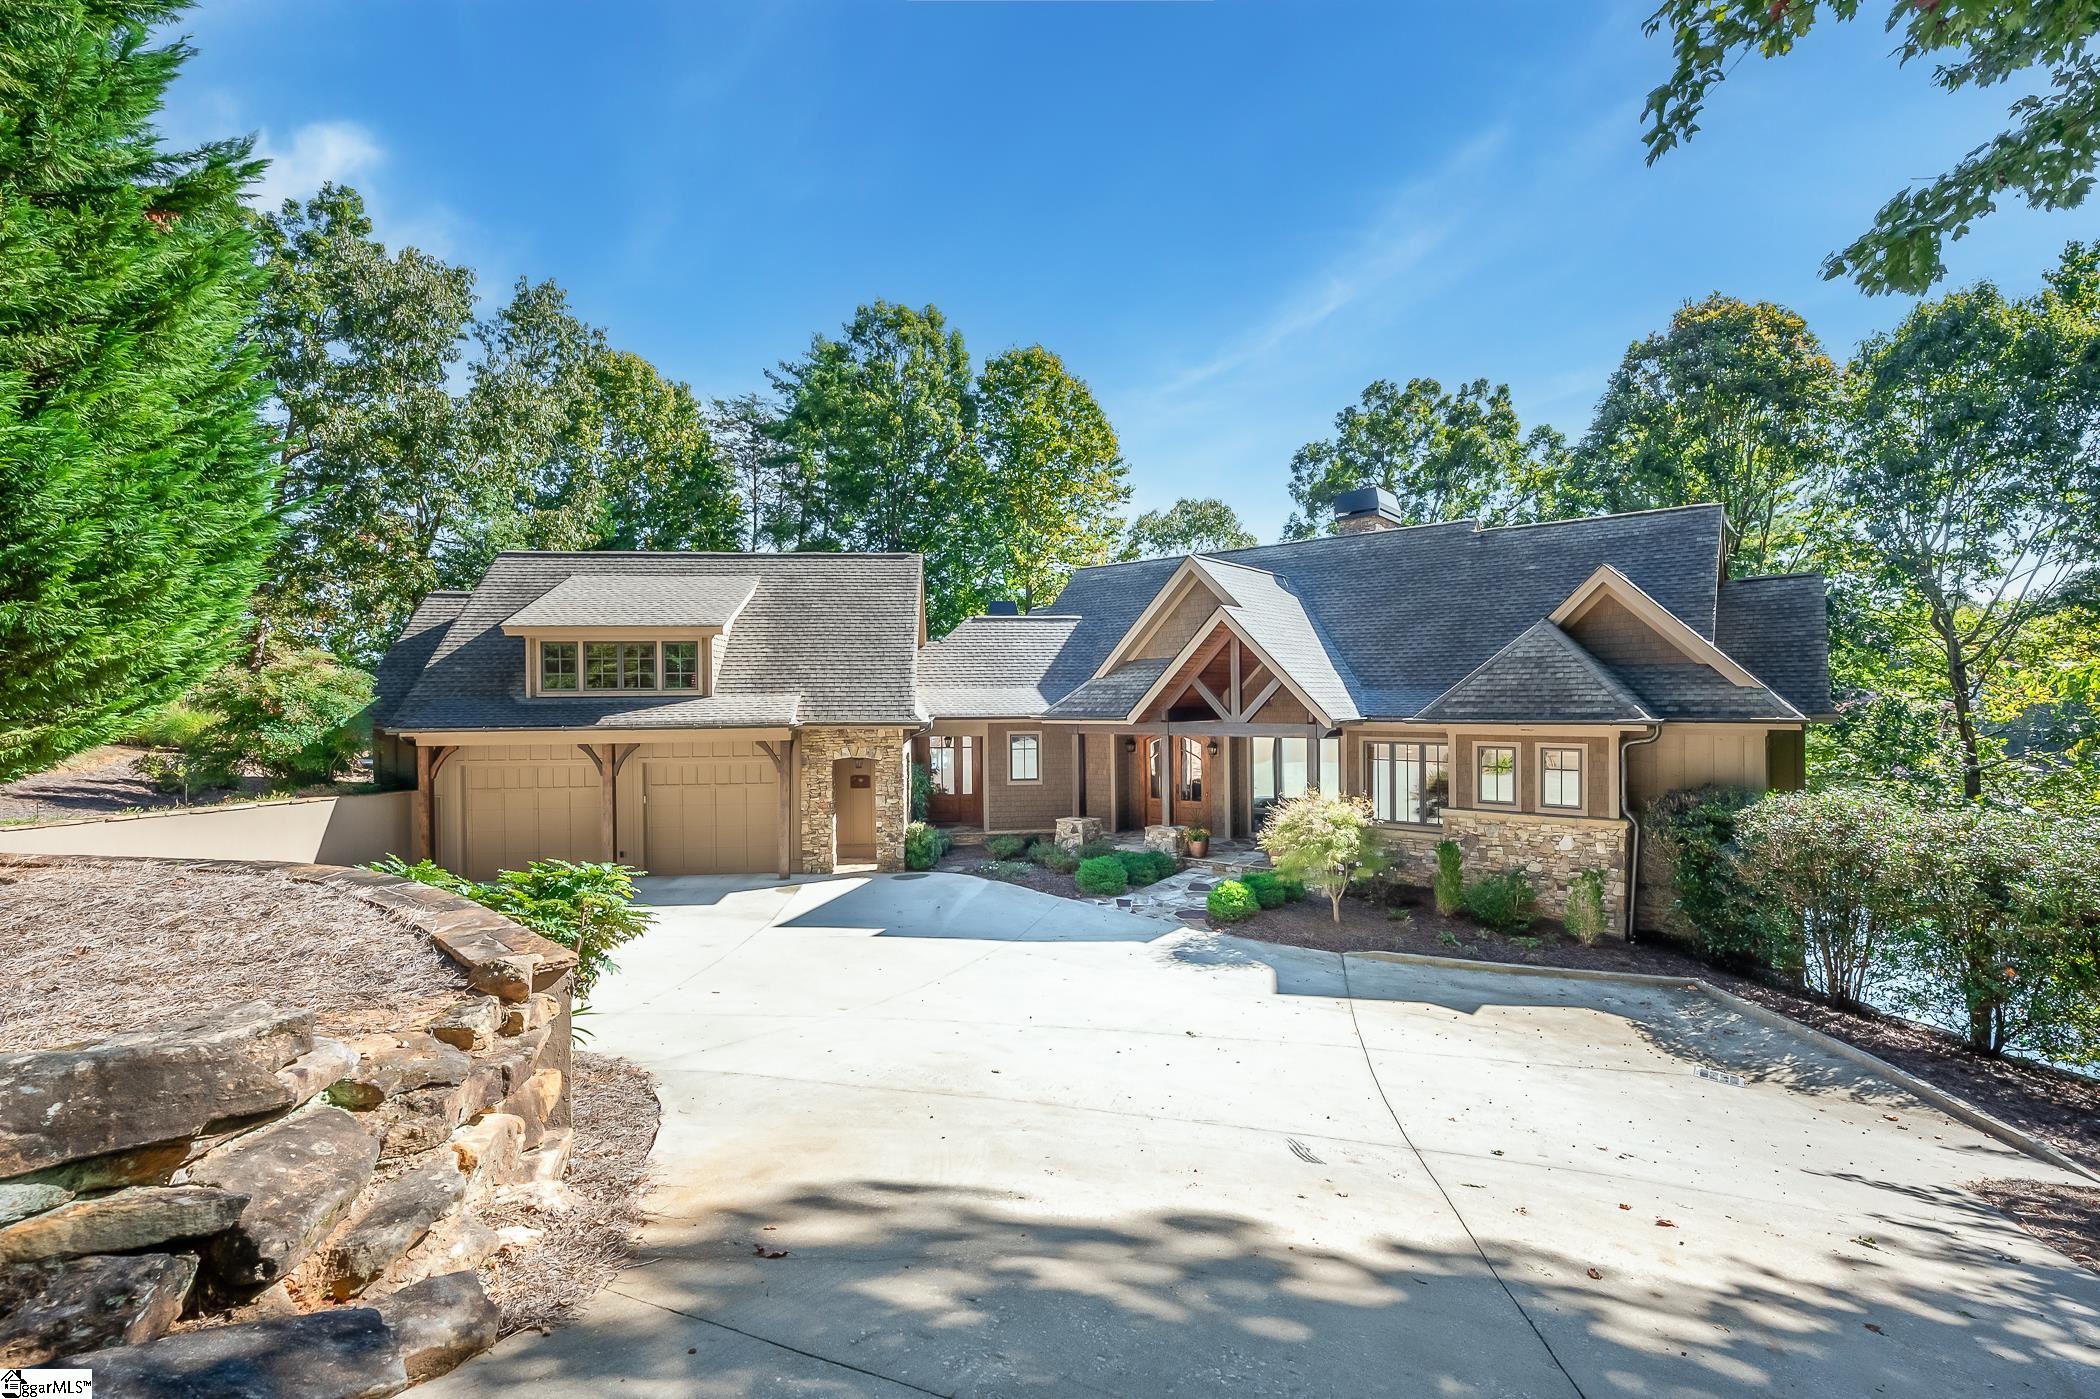 This exceptional lake-front home, located in The Cliffs at Keowee Falls community, exudes quality craftsmanship and attention to detail. As you arrive, a gracefully curved driveway leads to the inviting wooden and stone exterior. The double doors, featuring elegant windows, open to reveal an impressive entryway, providing a seamless transition into the vaulted great room. Its hardwood flooring beautifully mirrors the tongue & grooved ceiling, showcasing a striking two-story stone fireplace as the centerpiece.  Flowing effortlessly from the great room is an open concept kitchen and dining room, designed to delight any culinary enthusiast. This kitchen boasts an expansive amount of countertop space for food preparation, walk-in pantry, KitchenAid double wall ovens, a gas cooktop, a KitchenAid refrigerator and freezer with an ice maker, two sinks, an island, and a dining bar, all complemented by stunning rustic cabinetry. Adjacent to the kitchen and dining room, a thoughtfully placed screened porch awaits, adorned with another stone fireplace and a wooden vaulted ceiling. This sanctuary-like space offers sweeping views of the lake and is further enhanced by two smaller open-air decks, with one specifically tailored for grilling.  Also on the main level, you'll discover a laundry room, complete with a desk nook, custom cabinetry, and a sink. Additionally, the main level boasts a powder room, a wine cooler nook, a cozy formal office, and the master suite, ensuring every need is accounted for.  The master suite features plush carpeting, a vaulted nickel gap board ceiling, and captivating lake views. Imagine waking up each morning to the serene waters of Lake Keowee! This splendid suite also offers a thoughtfully designed spa-like bathroom, complete with a generously sized tiled walk-in shower, strategically high-placed windows for natural light, dual sinks, a spacious walk-in closet, a separate water closet, and a luxurious soaking tub.  The terrace level of this home presents even more expansive views of the emerald lake waters. A carpeted second living room, accompanied by a wet bar and a stone fireplace, sets the perfect ambiance for relaxation and entertainment on this lower level. Additionally, three generously sized guest suites await on this floor.  An additional laundry room on this level adds a touch of convenience. For outdoor enjoyment, a covered but open-air sitting patio mirrors the upper screened porch, offering a serene sanctuary to unwind after a day of lake activities.  Follow the gently sloped terrain, adorned with mature bushes, to your private covered dock, where endless opportunities for boating and swimming await. Furthermore, this well crafted home features a two car garage with a full bonus suite with bath, providing ample space for versatility and customization.  Experience the benefits of a club membership with The Cliffs, an elite community that boasts seven exclusive clubs throughout the area, all included in a single membership (available for separate purchase). Take advantage of a variety of world-class amenities, such as state-of-the-art wellness centers, world-renowned golf courses, inviting pools, formal dining restaurants, and delightful lakeside al fresco dining options.  Don't miss your chance to experience the relaxing lake lifestyle with this exceptional property!